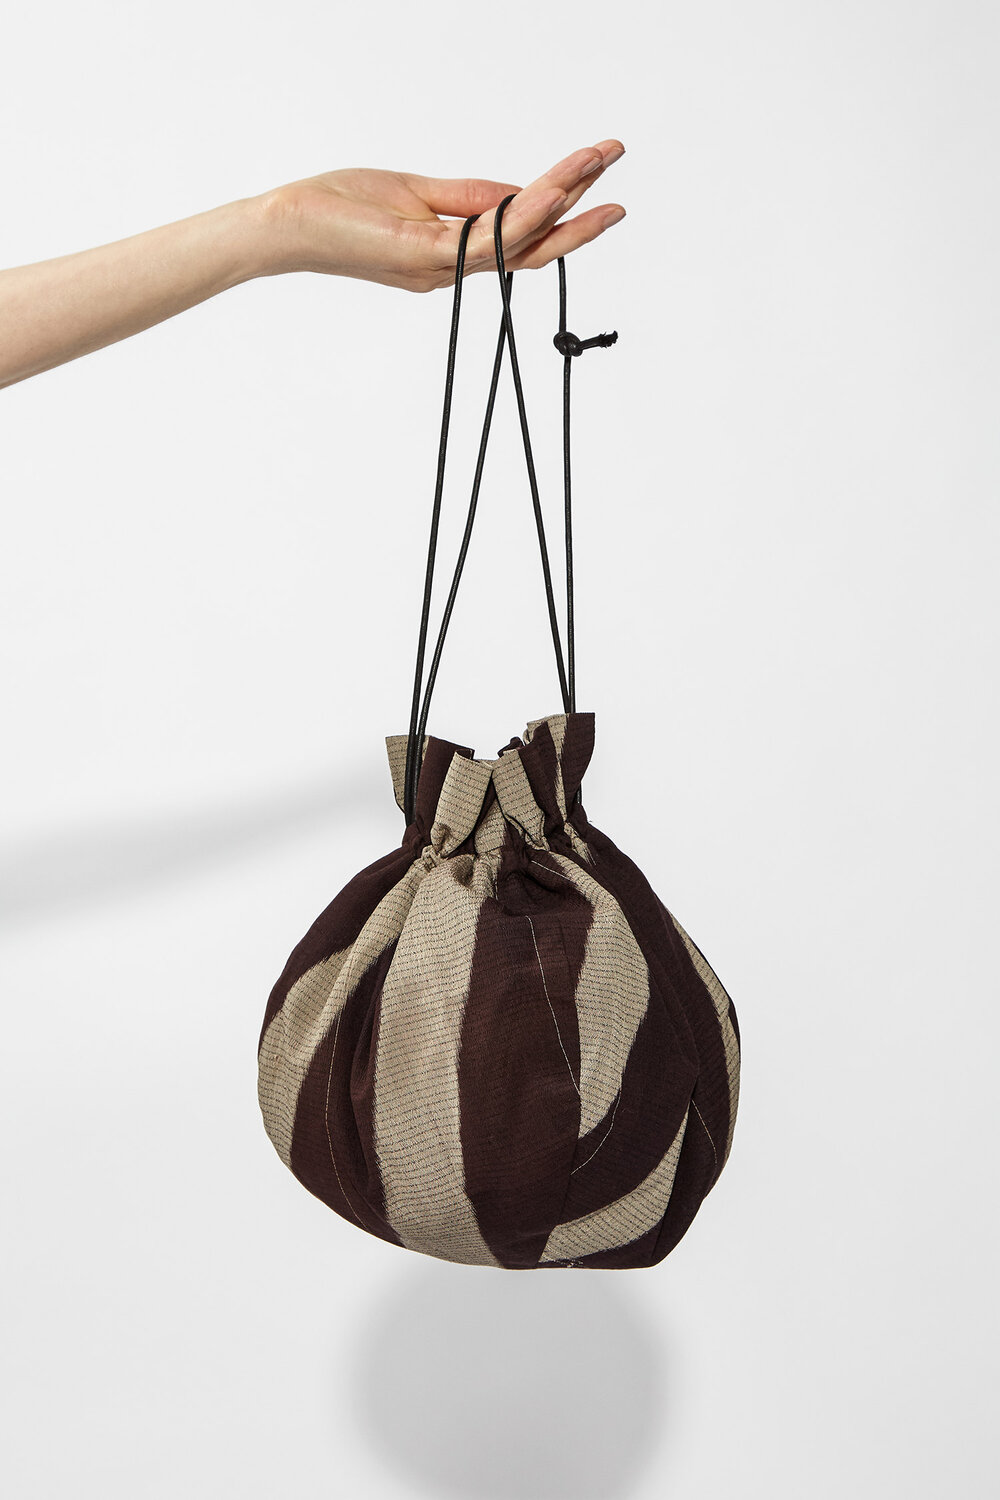 Marble Bag in Charcoal and Gray Vintage Japanese Silk Ikat Stripes —  ASIATICA